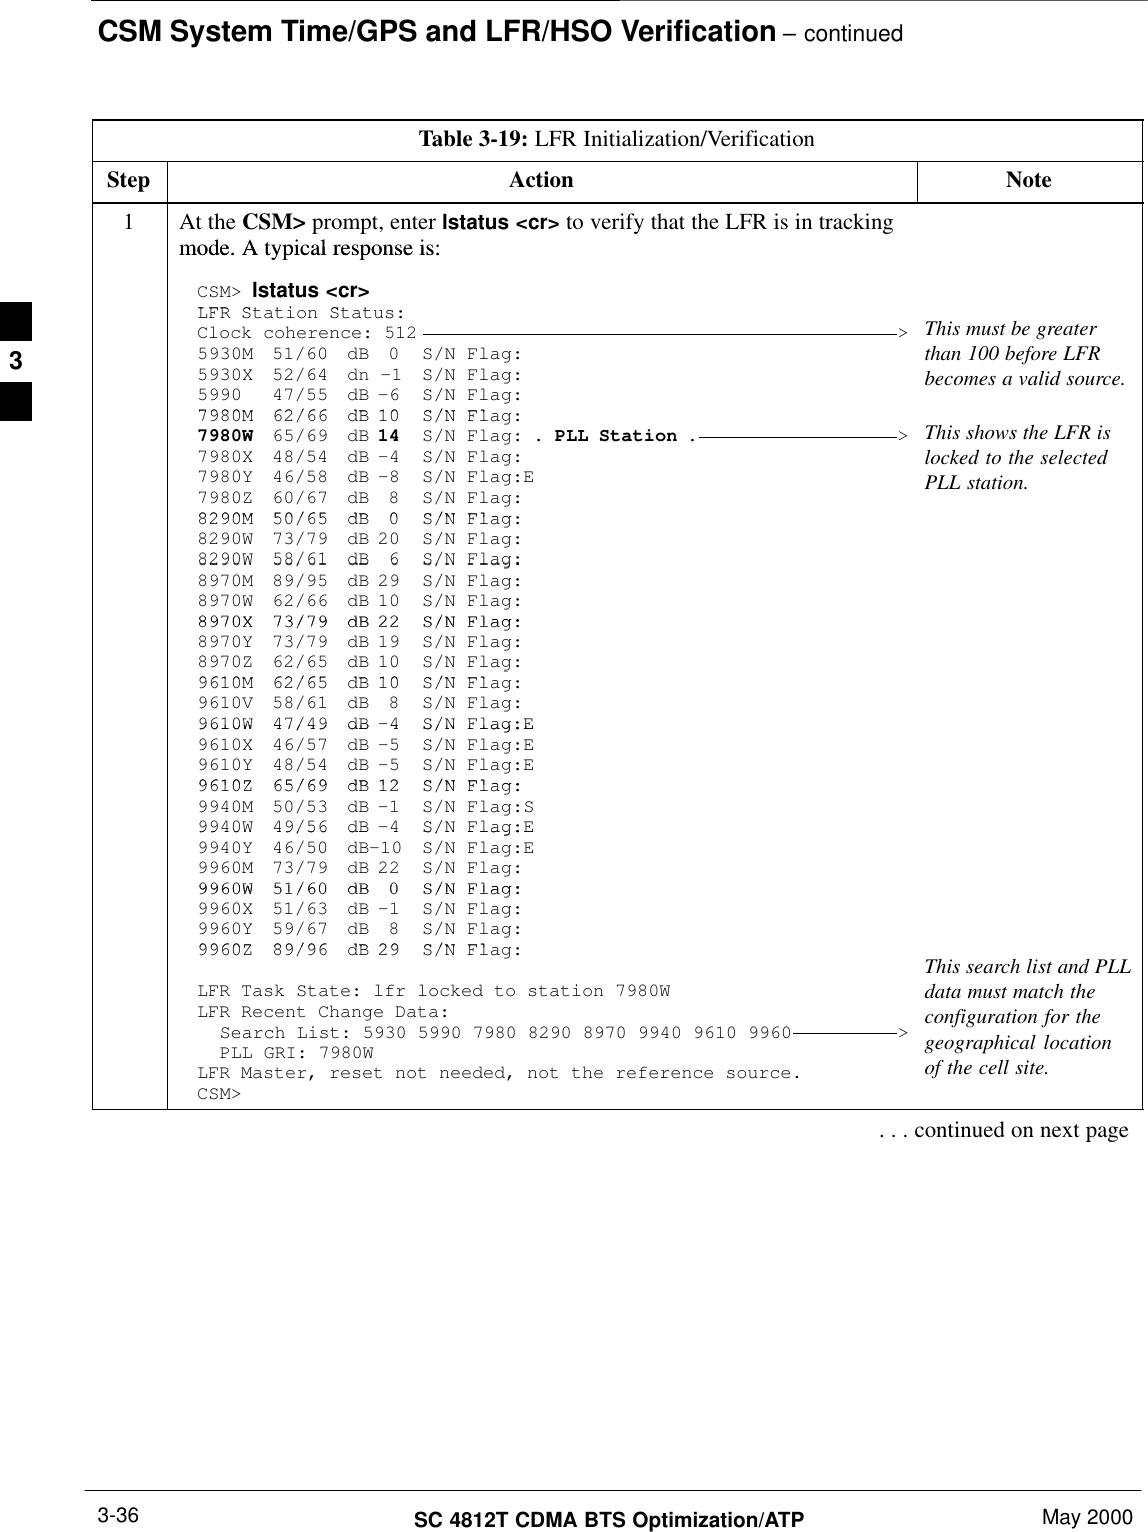 CSM System Time/GPS and LFR/HSO Verification – continuedSC 4812T CDMA BTS Optimization/ATP May 20003-36Table 3-19: LFR Initialization/VerificationStep Action Note1At the CSM&gt; prompt, enter lstatus &lt;cr&gt; to verify that the LFR is in trackingmode. A typical response is:mode. A typical response is:CSM&gt; lstatus &lt;cr&gt;LFR St ti St tLFR Station Status:Clock coherence: 512 &gt;5930M 51/60 dB 0 S/N Flag:5930X 52/64 dn –1 S/N Flag:5990 47/55 dB –6 S/N Flag:7980M 62/66 dB 10 S/N FlThis must be greaterthan 100 before LFRbecomes a valid source.7980M 62/66 dB 10 S/N Flag:7980W 65/69 dB 14 S/N Flag: . PLL Station . &gt;7980X 48/54 dB –4 S/N Flag:7980Y 46/58 dB –8 S/N Flag:E7980Z 60/67 dB 8 S/N Flag:8290M 50/65 dB 0 S/N FlagThis shows the LFR islocked to the selectedPLL station.8290M 50/65 dB 0 S/N Flag:8290W 73/79 dB 20 S/N Flag:8290W 58/61 dB 6 S/N Flag:8290W 58/61 dB 6 S/N Flag:8970M 89/95 dB 29 S/N Flag:8970W 62/66 dB 10 S/N Flag:8970X 73/79 dB 22 S/N Flag:8970X 73/79 dB 22 S/N Flag:8970Y 73/79 dB 19 S/N Flag:8970Z 62/65 dB 10 S/N Flag:9610M 62/65 dB 10 S/N Flg9610M 62/65 dB 10 S/N Flag:9610V 58/61 dB 8 S/N Flag:9610W 47/49 dB –4 S/N Flag:E9610W 47/49 dB –4 S/N Flag:E9610X 46/57 dB –5 S/N Flag:E9610Y 48/54 dB –5 S/N Flag:E9610Z 65/69 dB 12 S/N Flag:9610Z 65/69 dB 12 S/N Flag:9940M 50/53 dB –1 S/N Flag:S9940W 49/56 dB –4 S/N Flag:E9940W 49/56 dB 4 S/N Flag:E9940Y 46/50 dB–10 S/N Flag:E9960M 73/79 dB 22 S/N Flag:9960W 51/60 dB 0 S/N Flag:9960W 51/60 dB 0 S/N Flag:9960X 51/63 dB –1 S/N Flag:9960Y 59/67 dB 8 S/N Flag:9960Z 89/96 dB 29 S/N Fl9960Z 89/96 dB 29 S/N Flag:LFR Task State: lfr locked to station 7980WLFR Recent Change Data:Search List: 5930 5990 7980 8290 8970 9940 9610 9960 &gt;PLL GRI: 7980WLFR Master, reset not needed, not the reference source.CSM&gt;This search list and PLLdata must match theconfiguration for thegeographical locationof the cell site.. . . continued on next page3